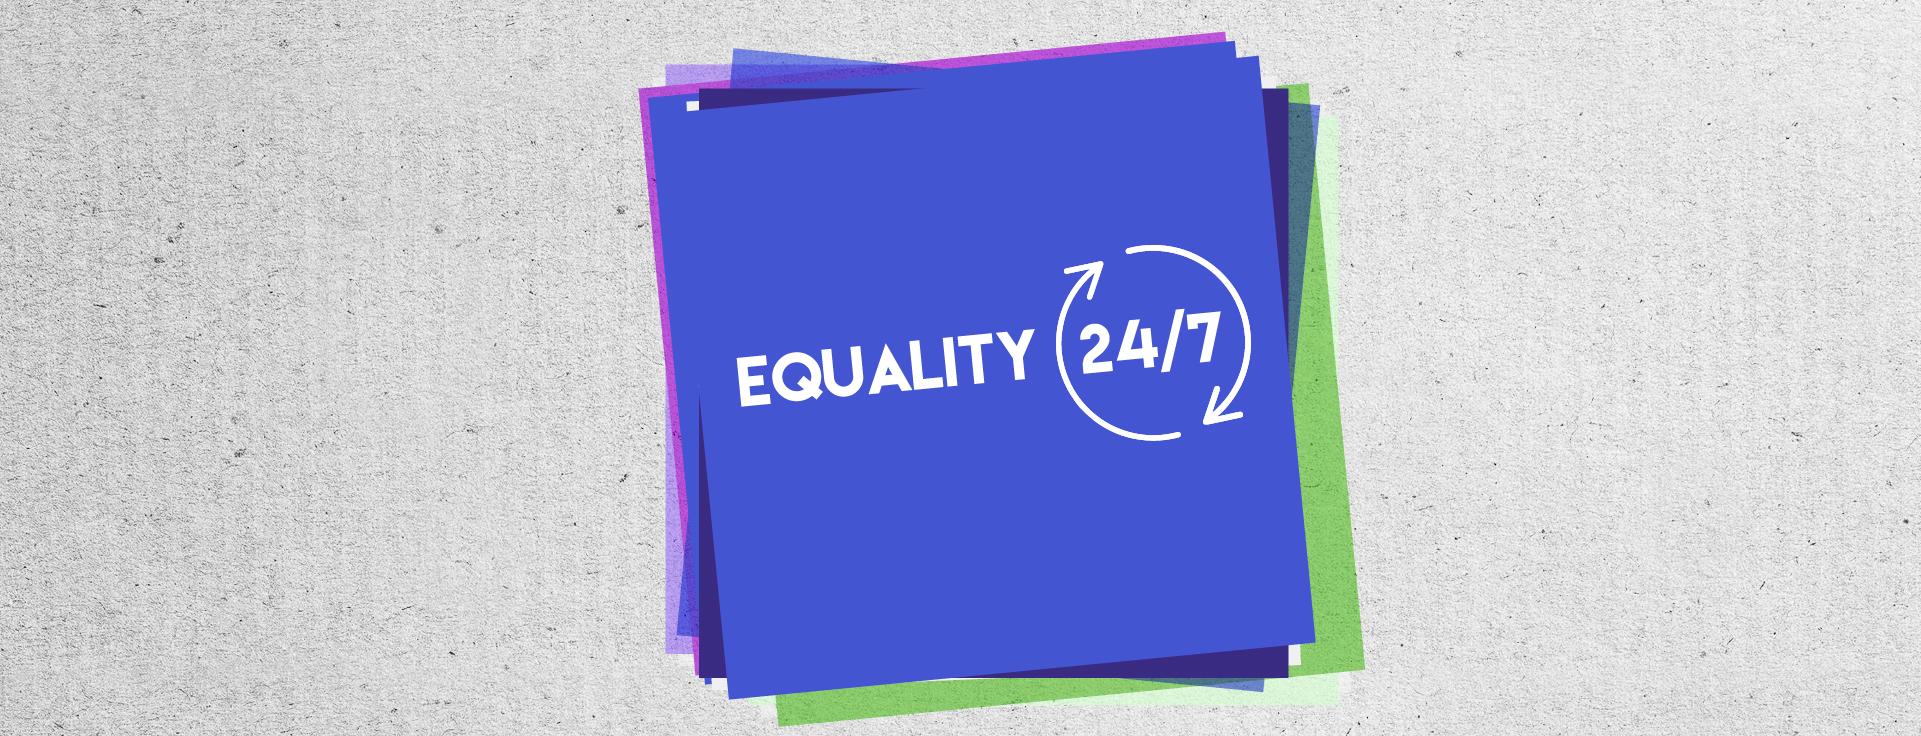 "Equality 24/7" written on purple and green notes